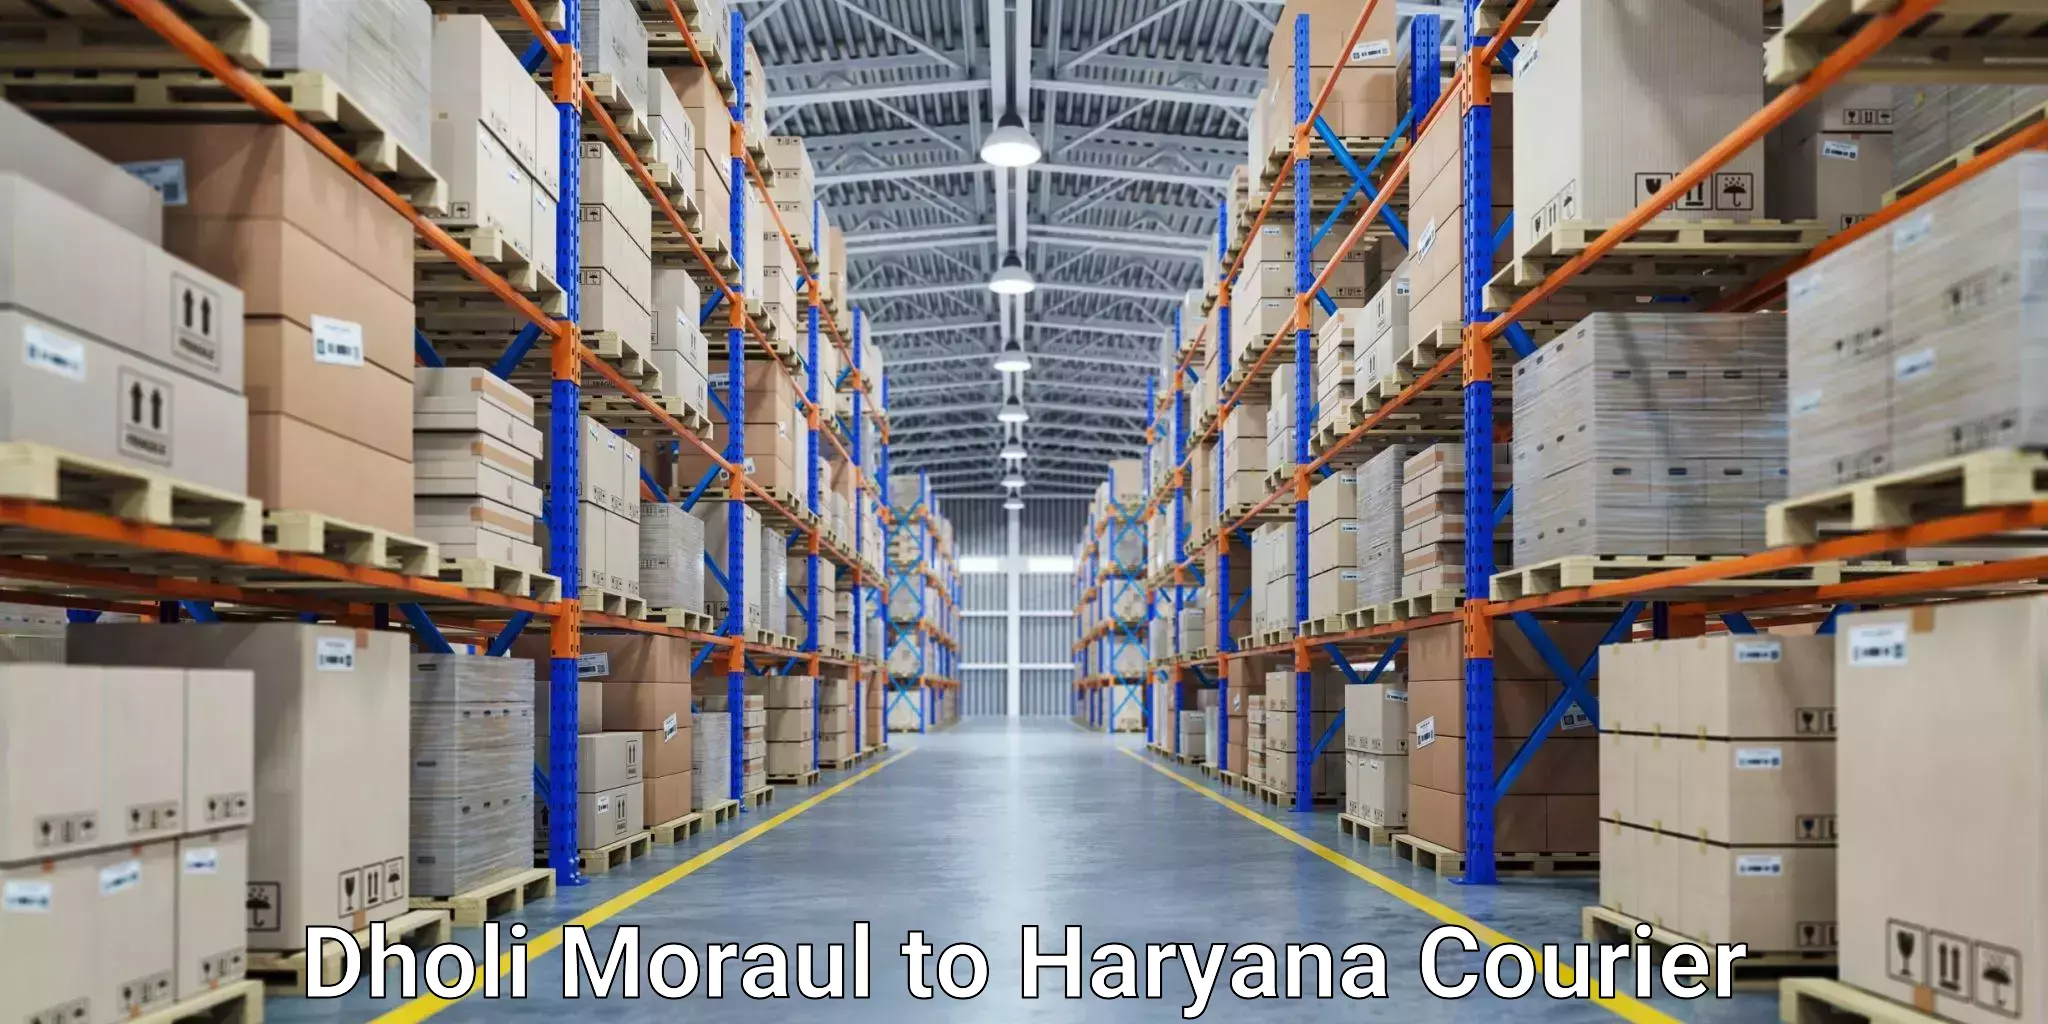 Quality courier services Dholi Moraul to Jhajjar